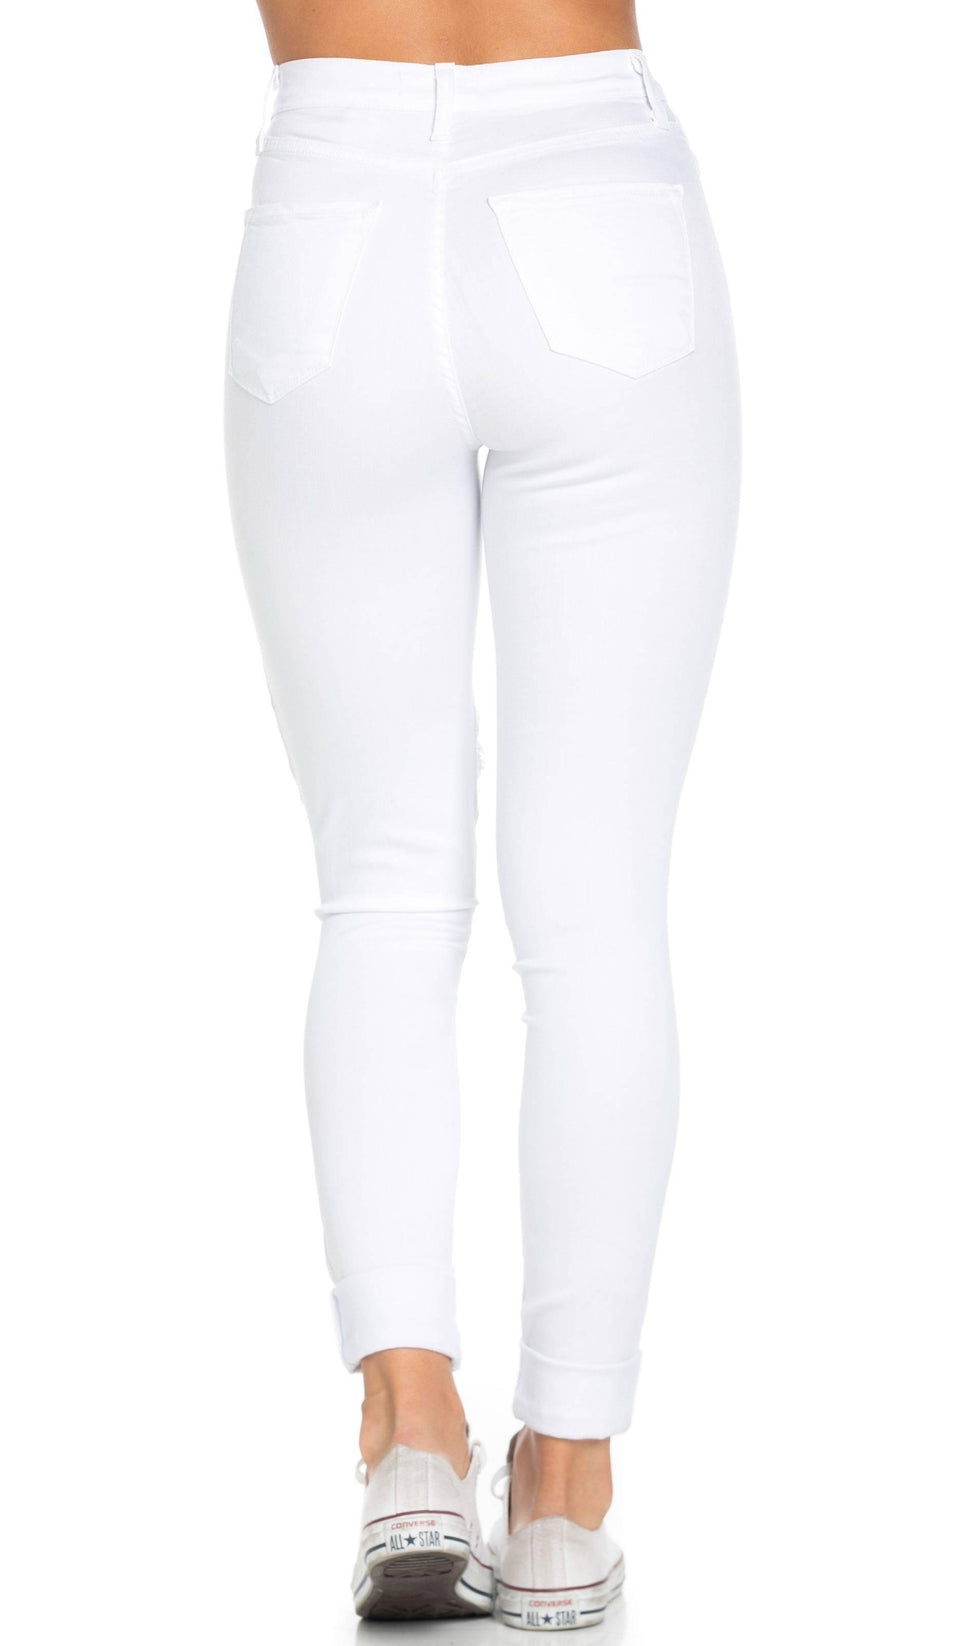 High Waisted Distressed Skinny Jeans in White (Plus Sizes Available ...